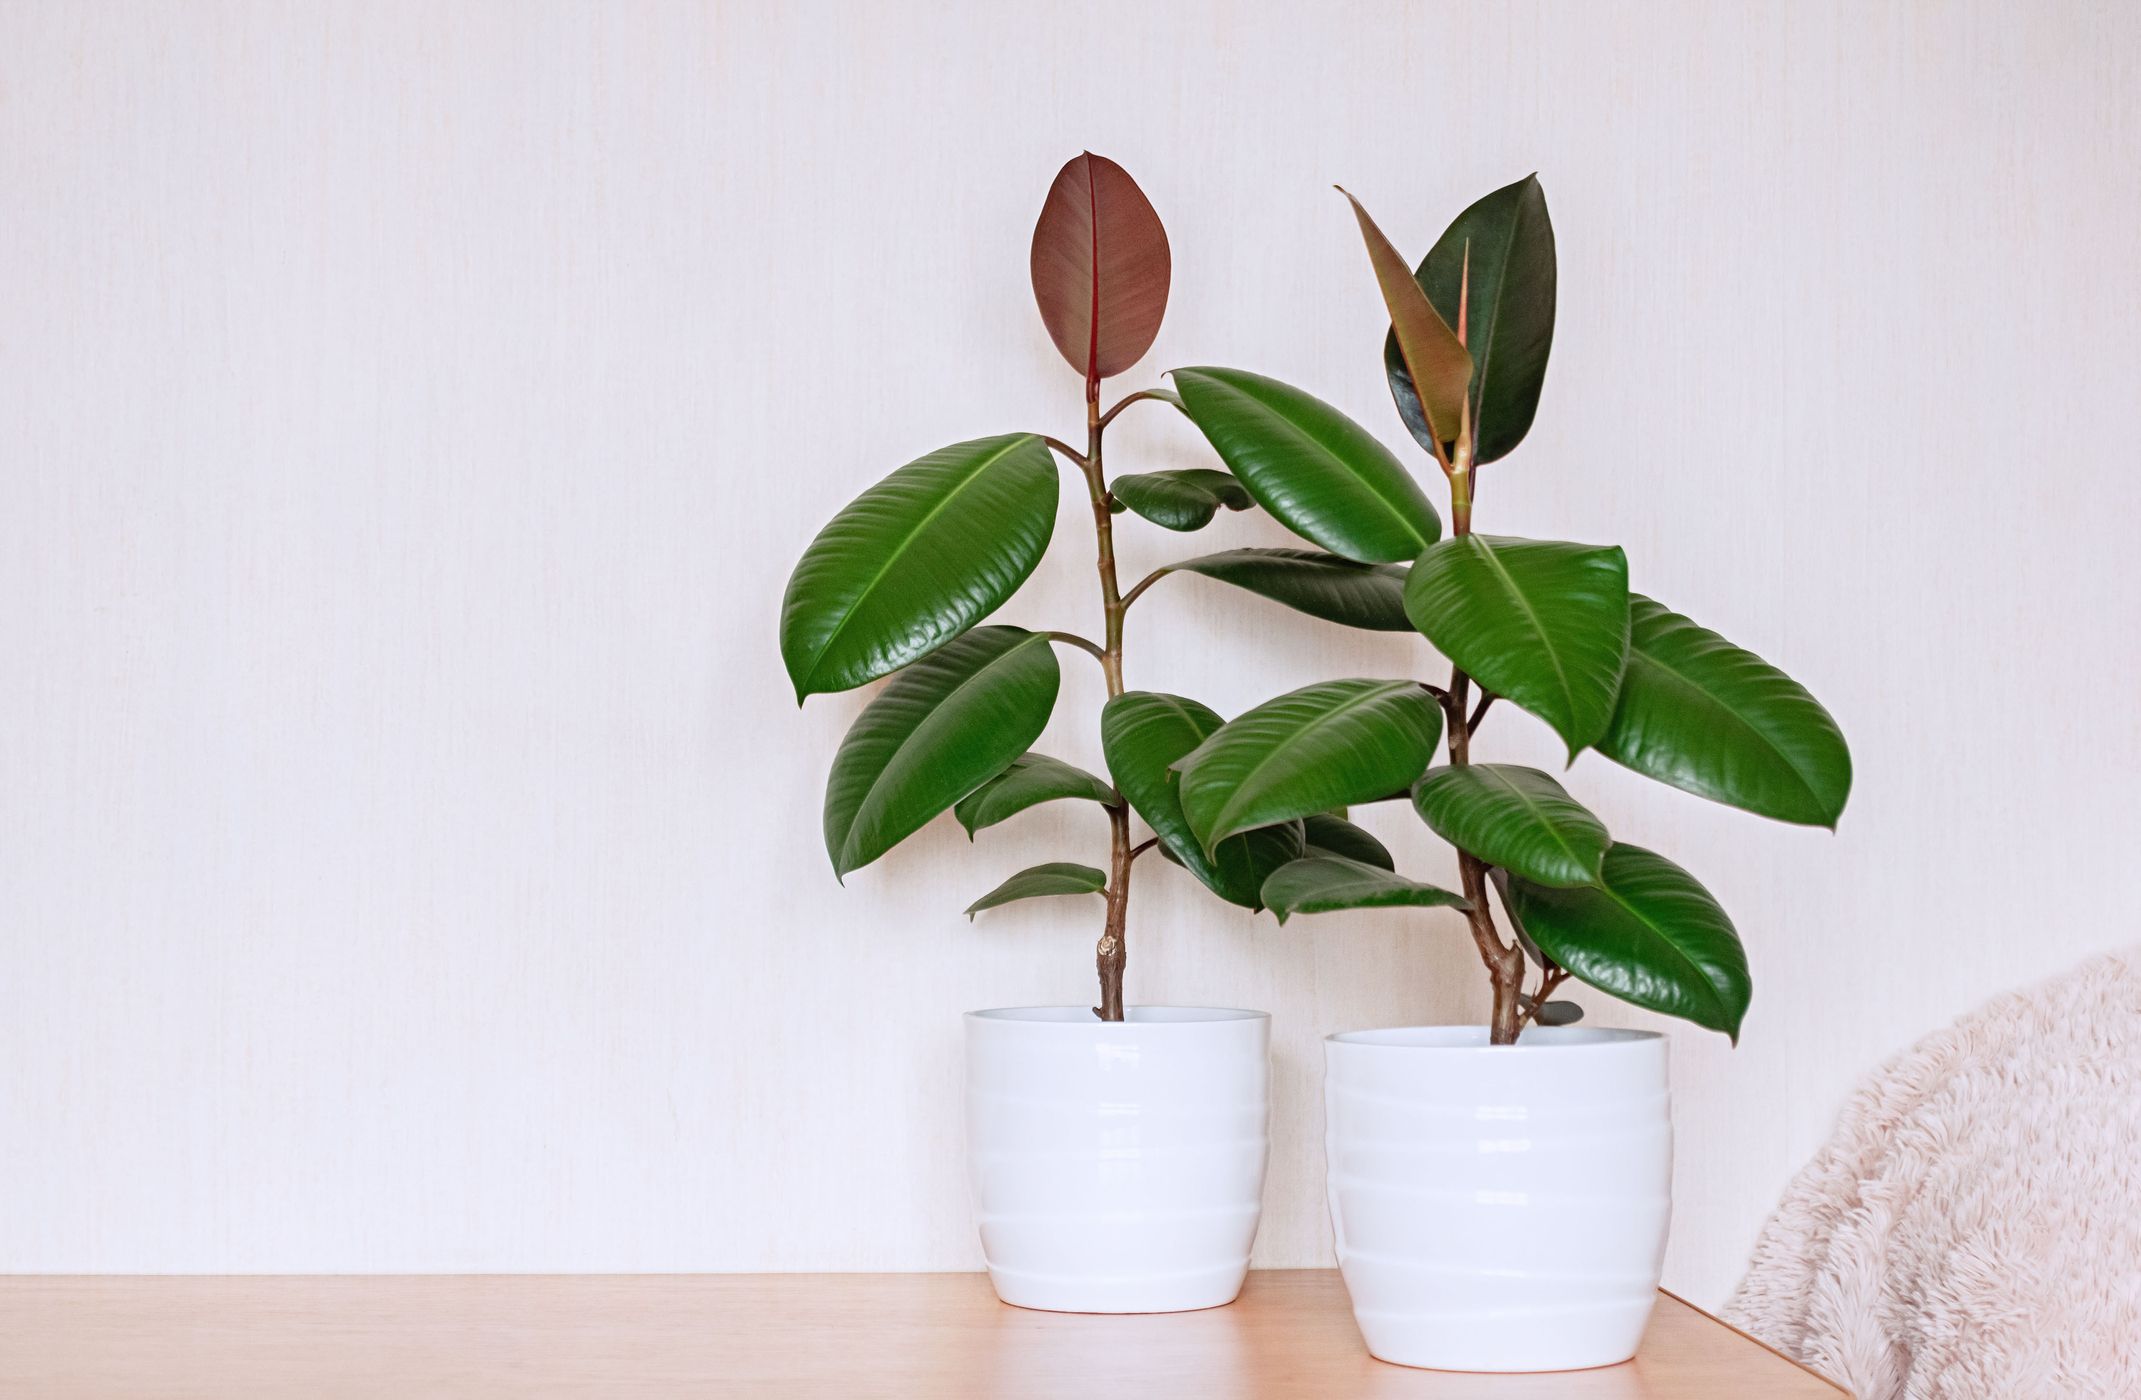 How to Care for a Rubber Plant